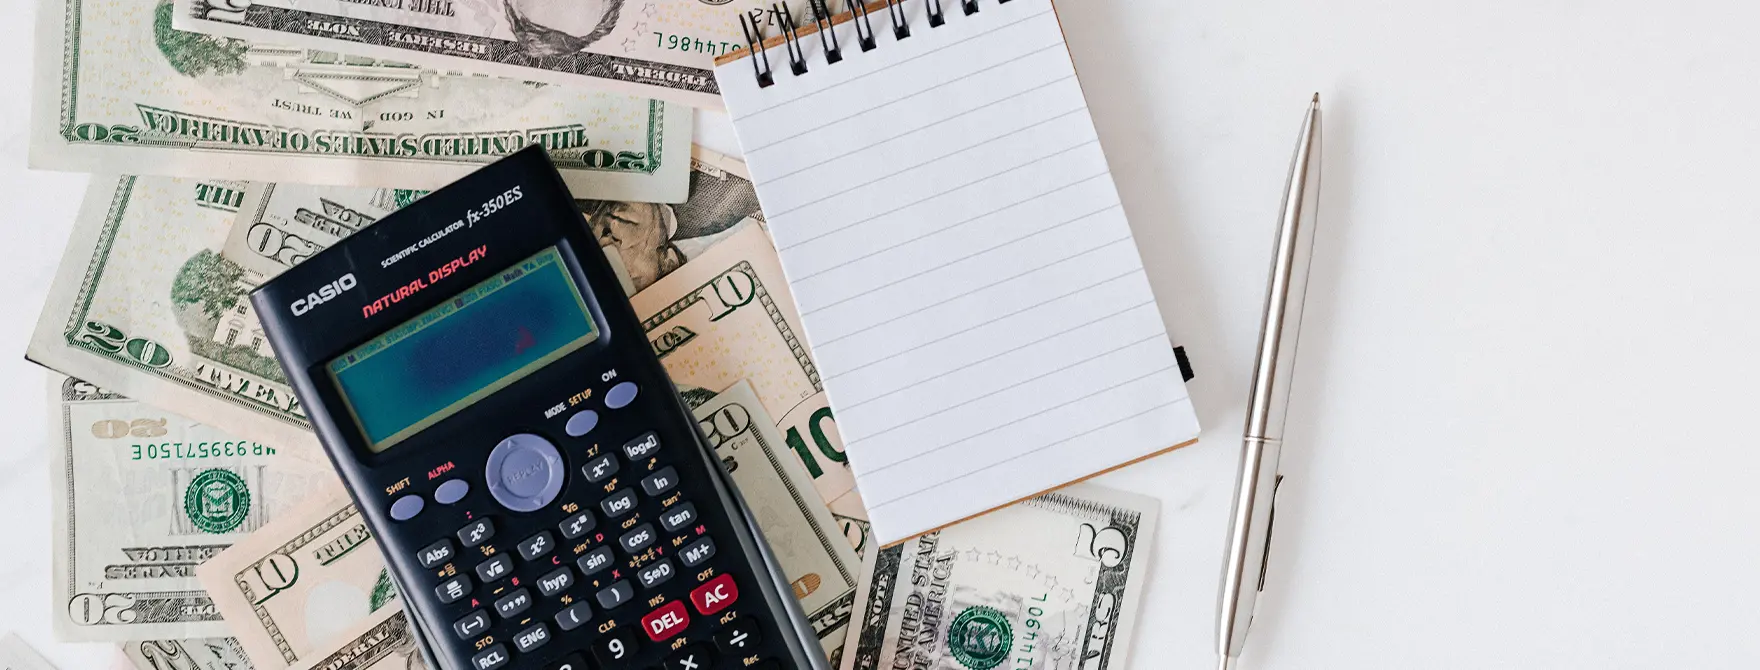 A calculator, notepad, and pen resting on a pile of cash